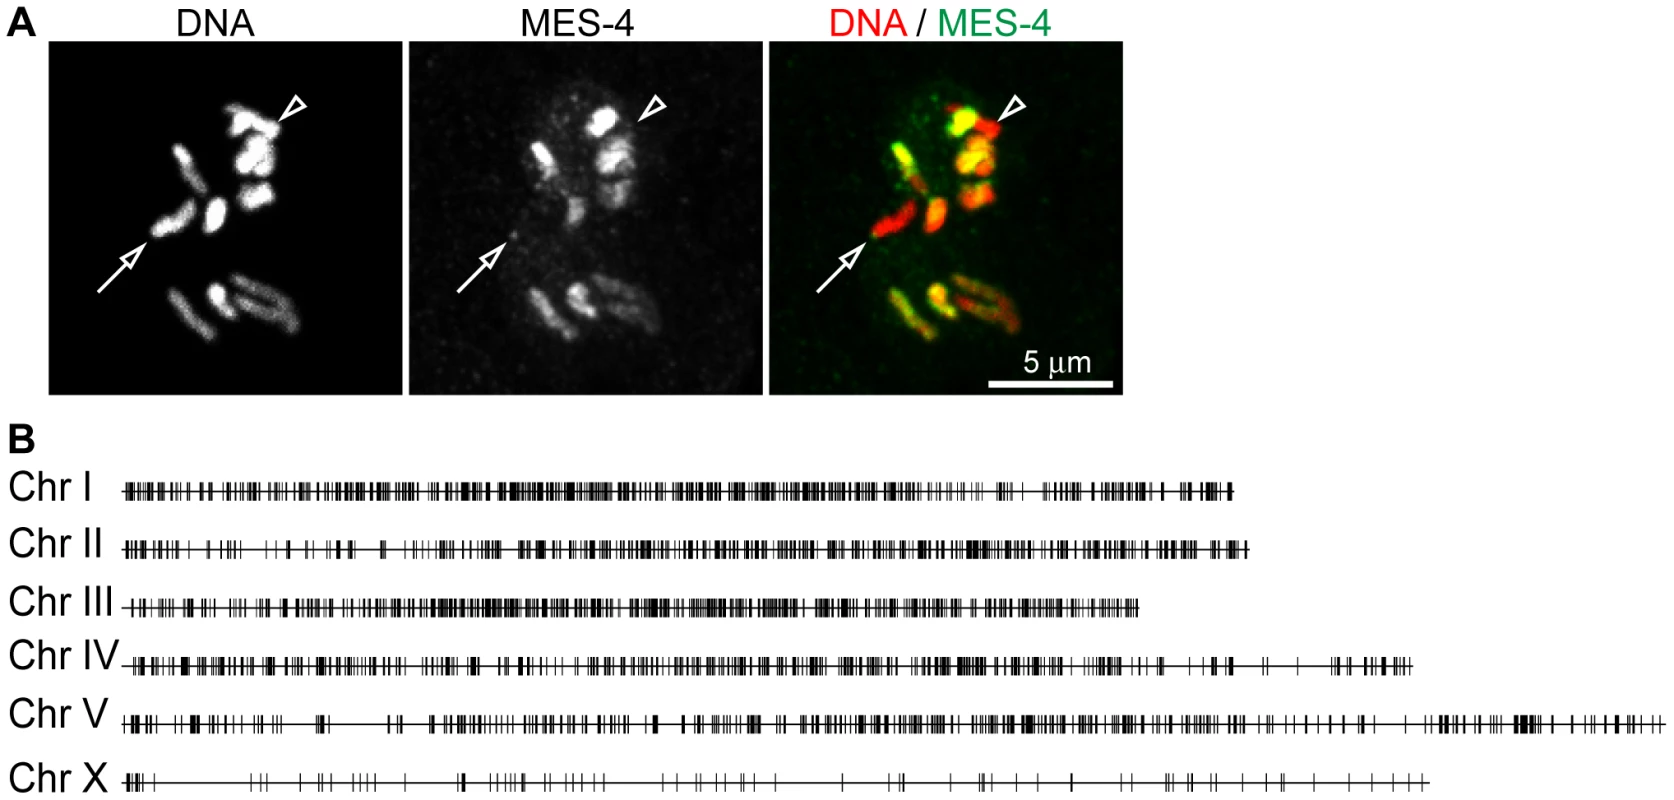 MES-4 is concentrated on the autosomes and the left tip of the X chromosome.